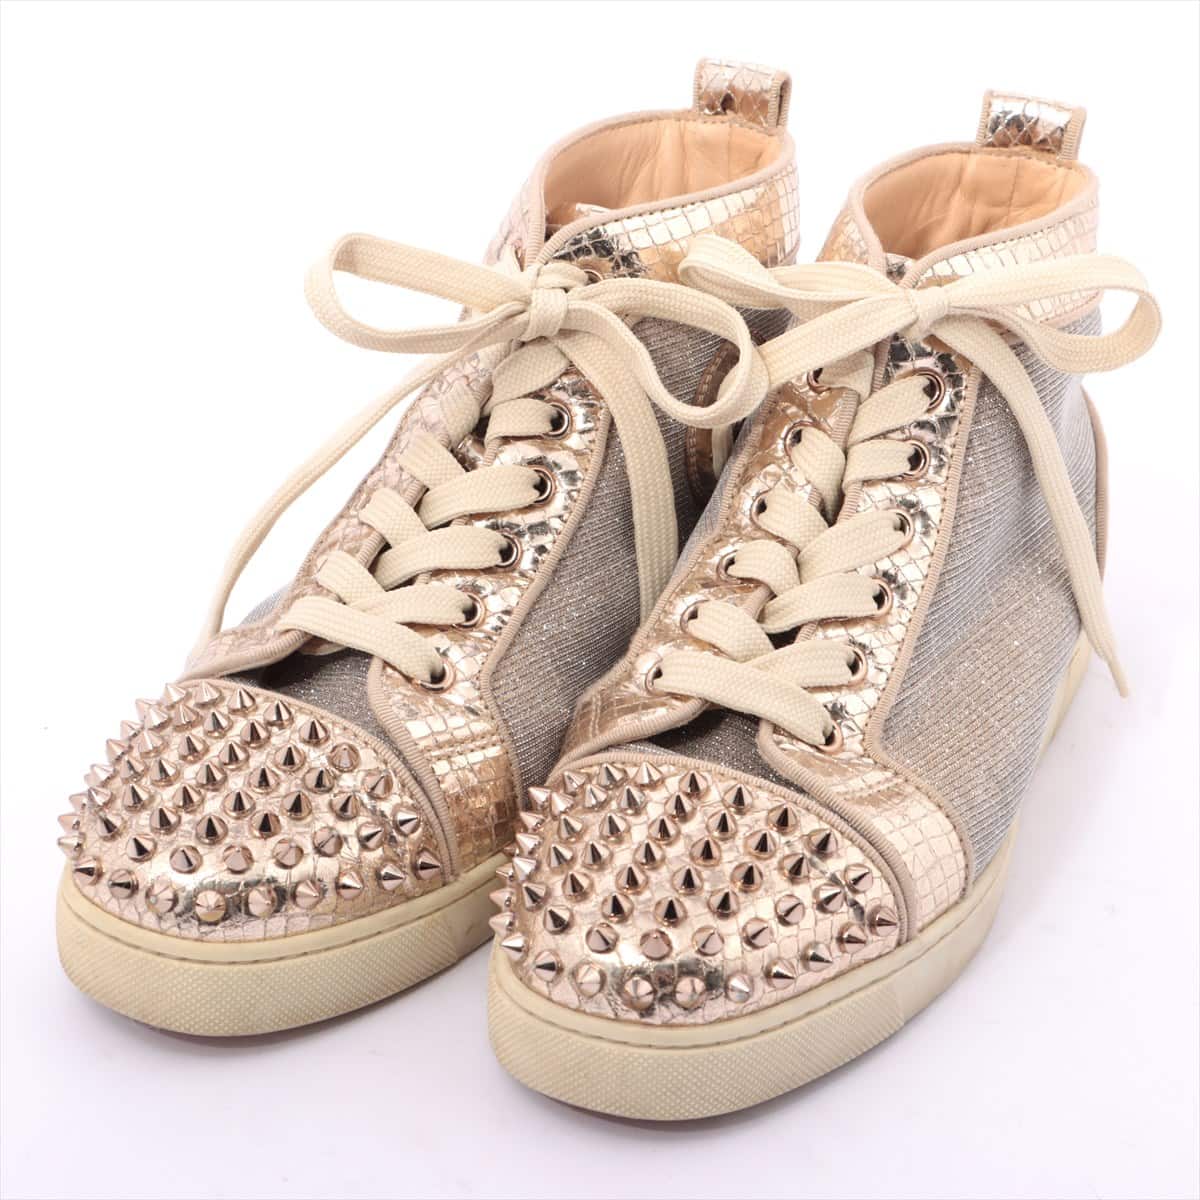 Christian Louboutin Lewis Spike Leather x fabric High-top Sneakers 38.5 Ladies' Gold × Silver